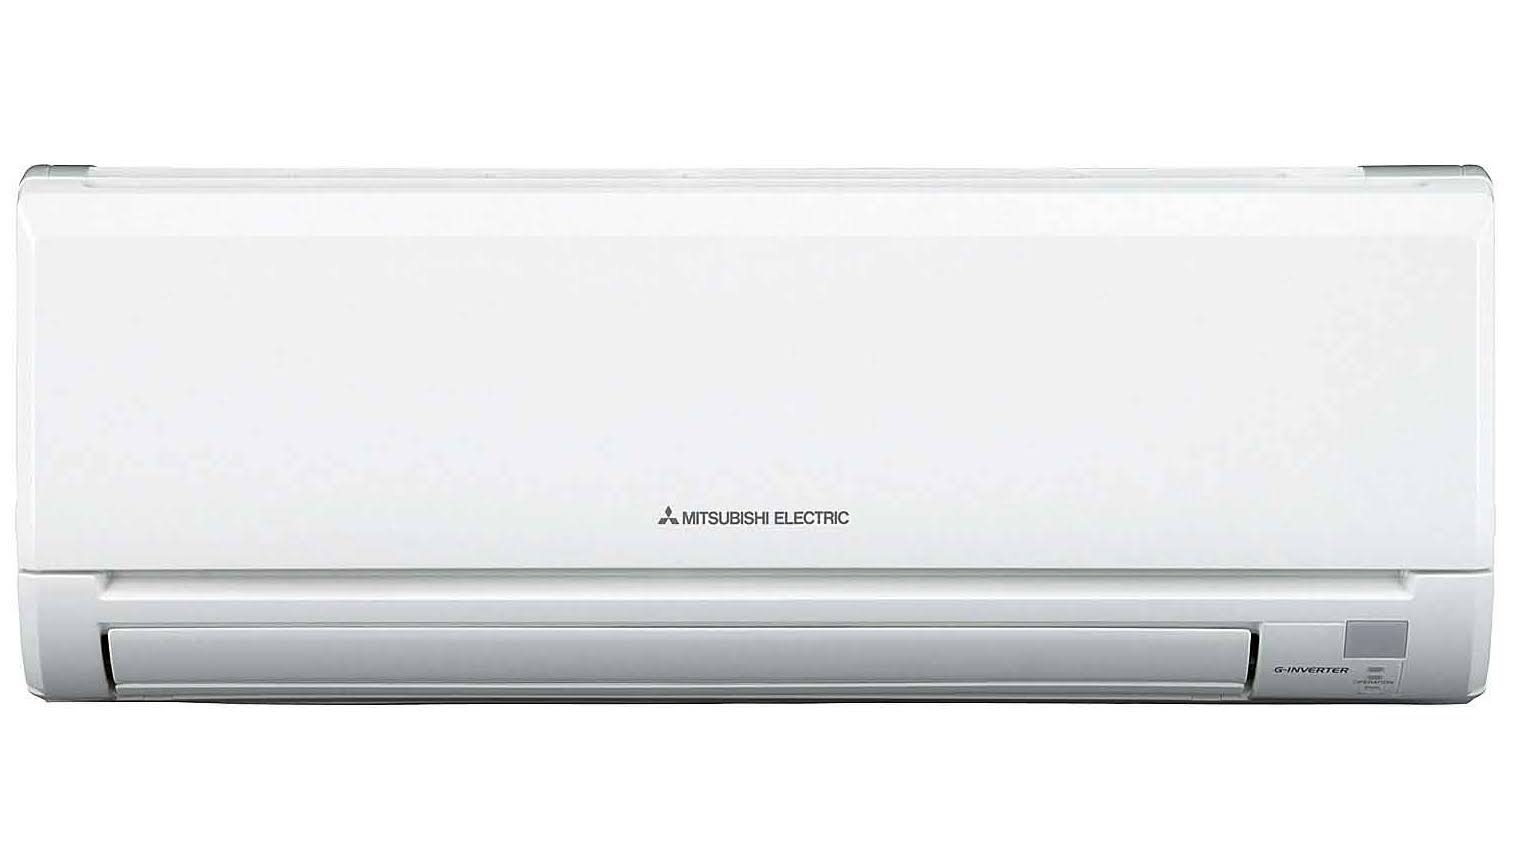 Mitsubishi Electric air conditioning for small room size